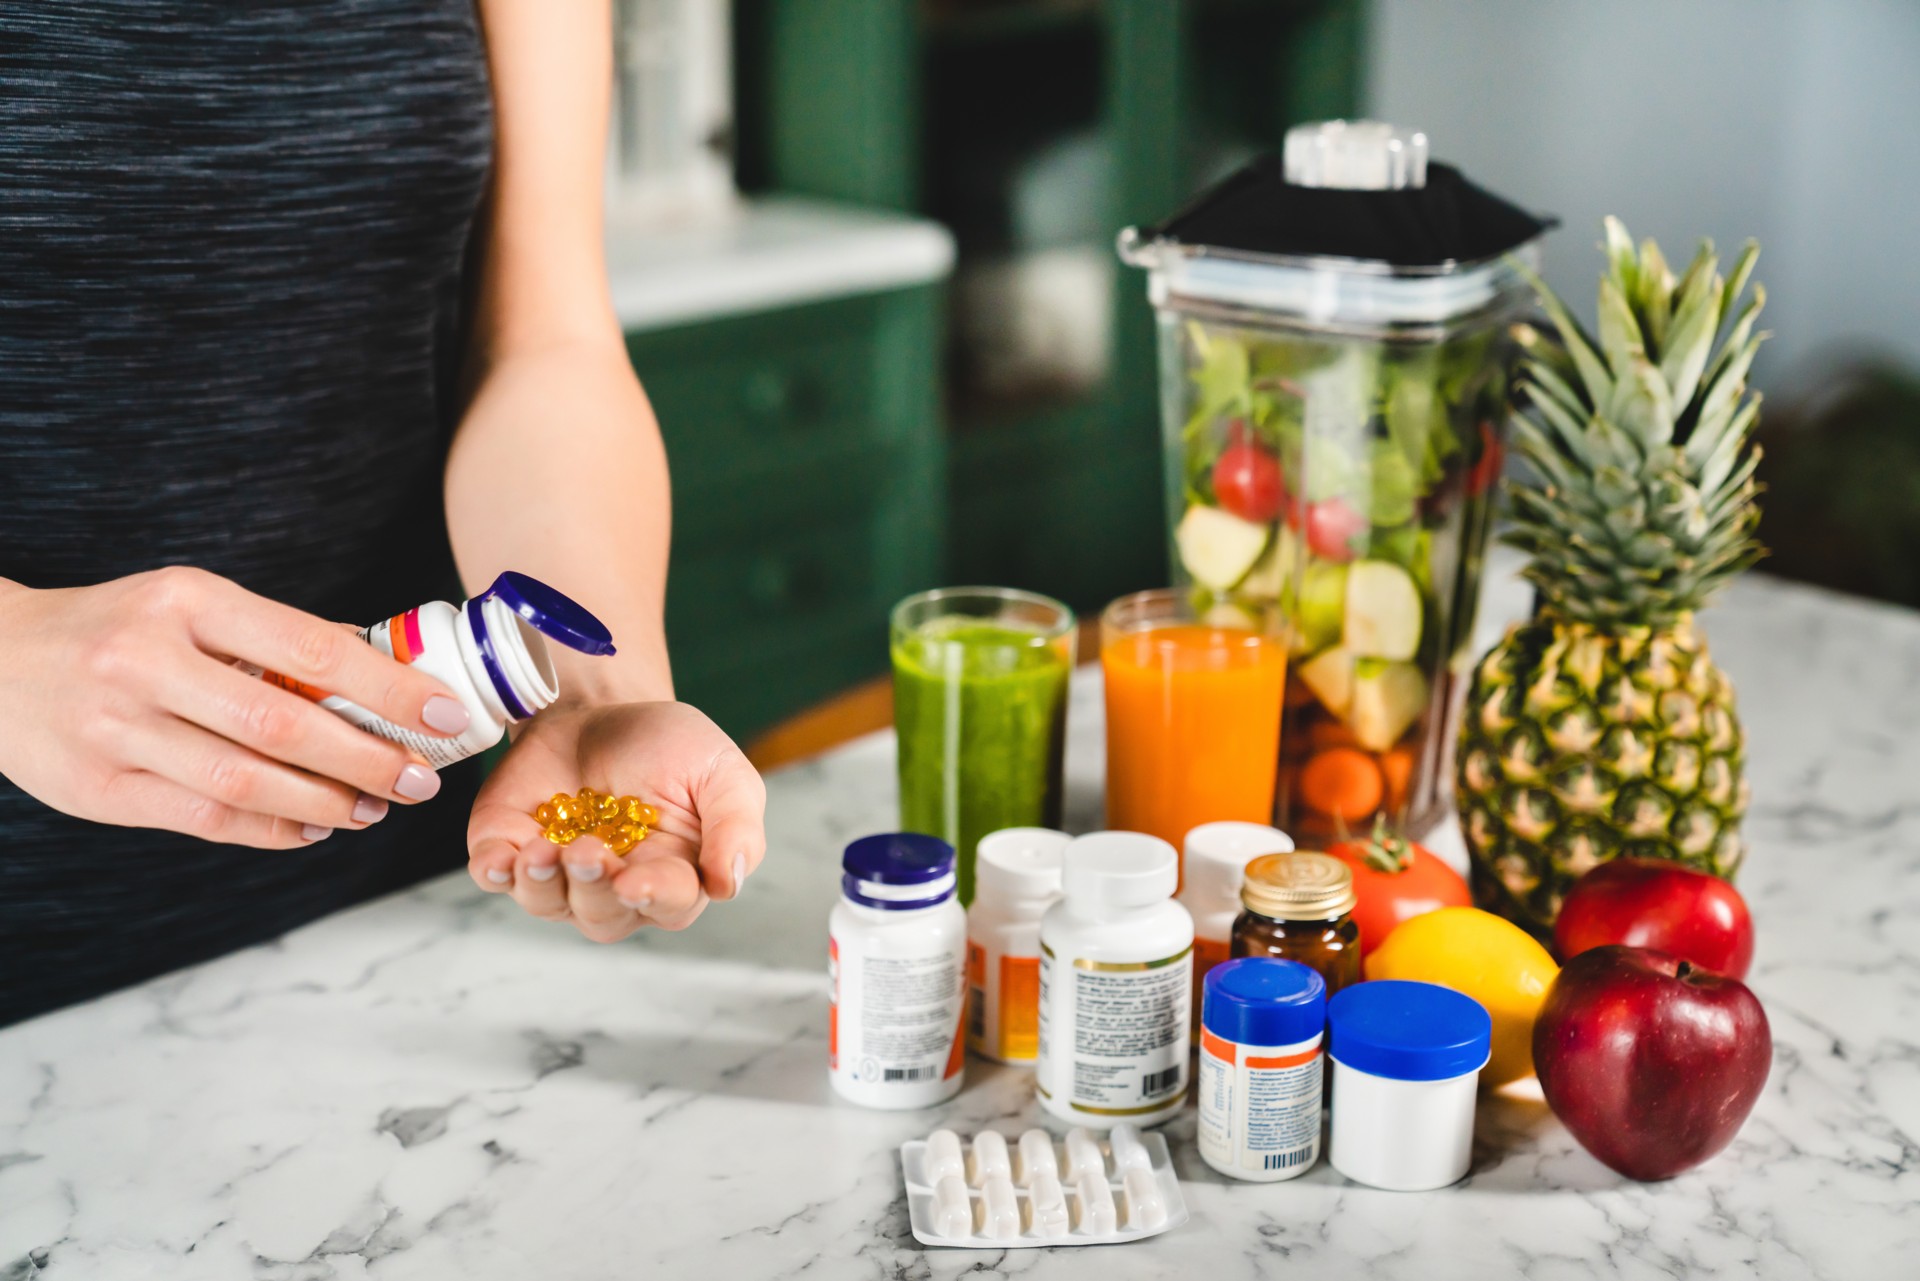 What Consumers Need to Know About Supplements Before Making a Purchase